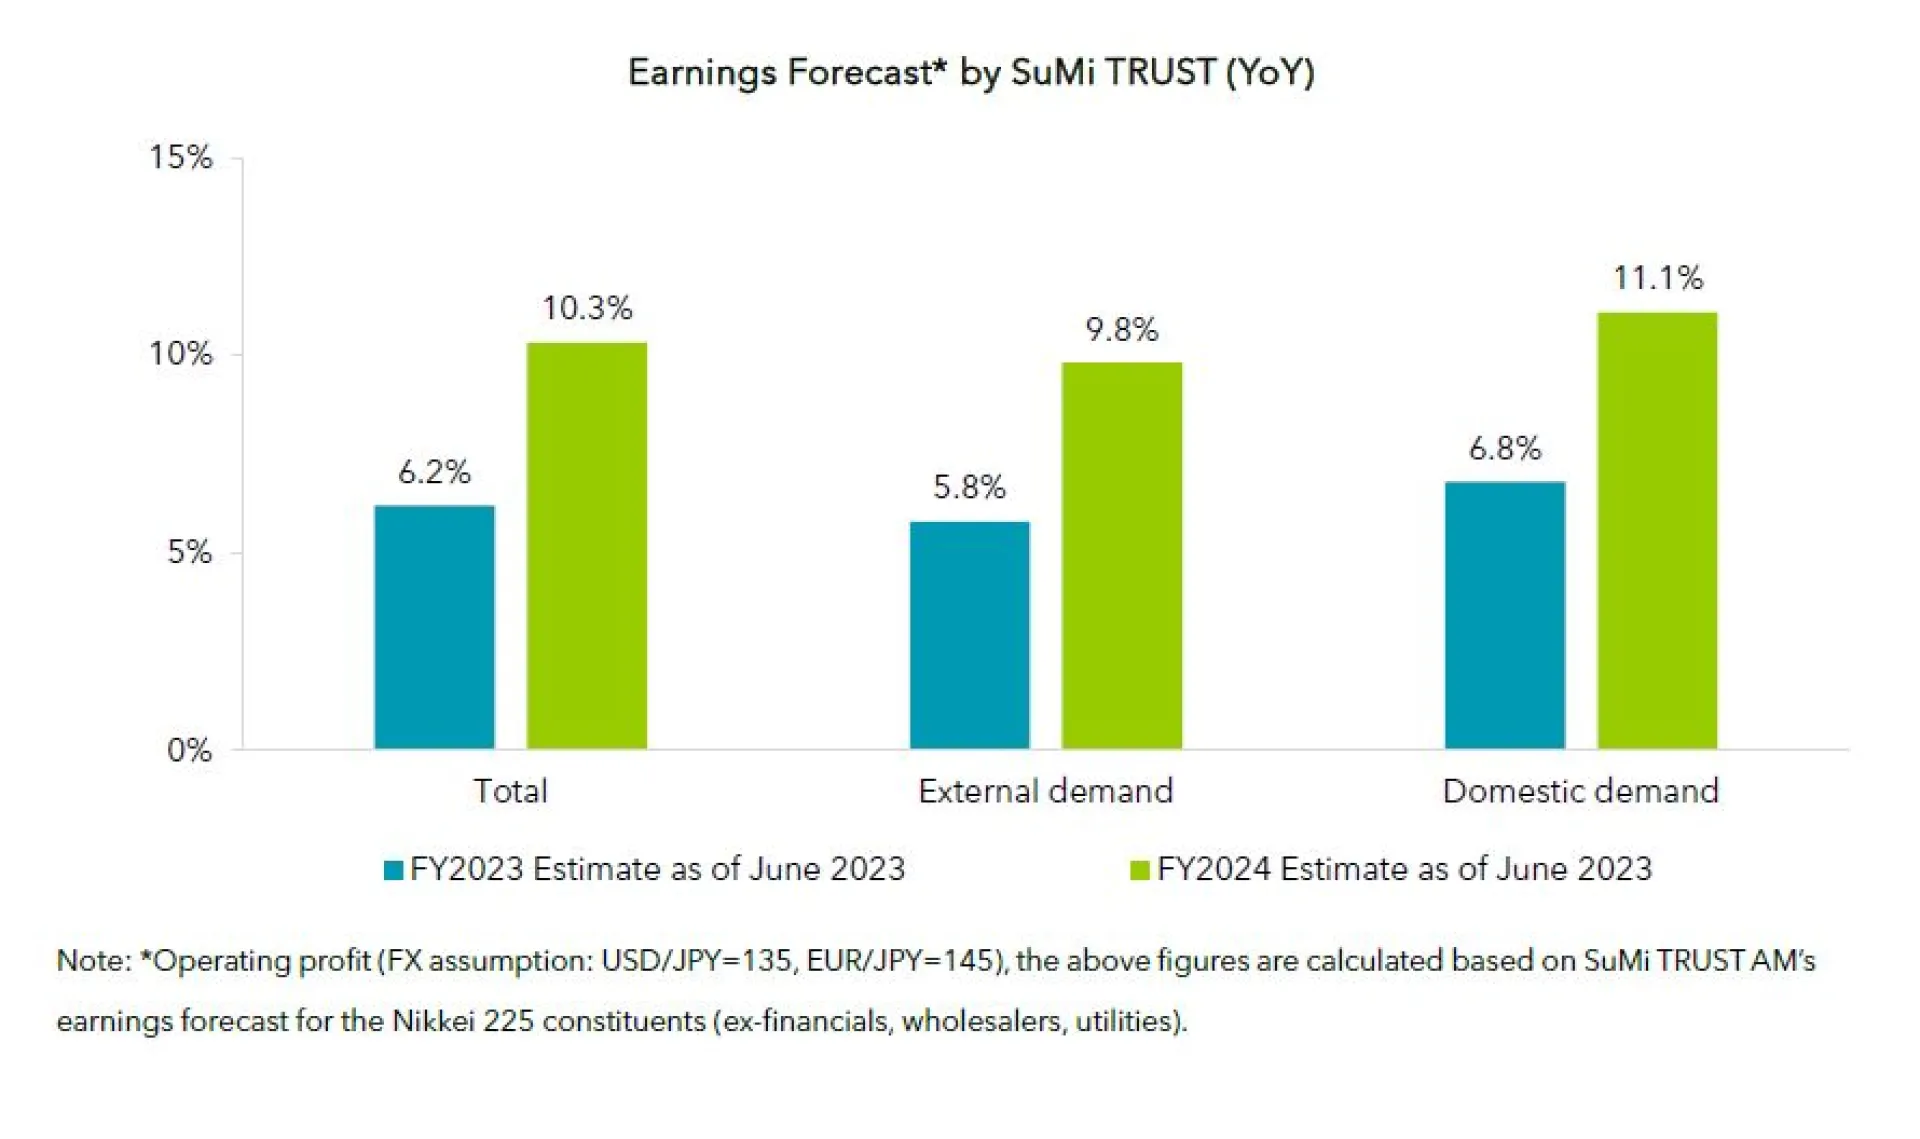 Earnings Forecast by SuMi TRUST (YoY)